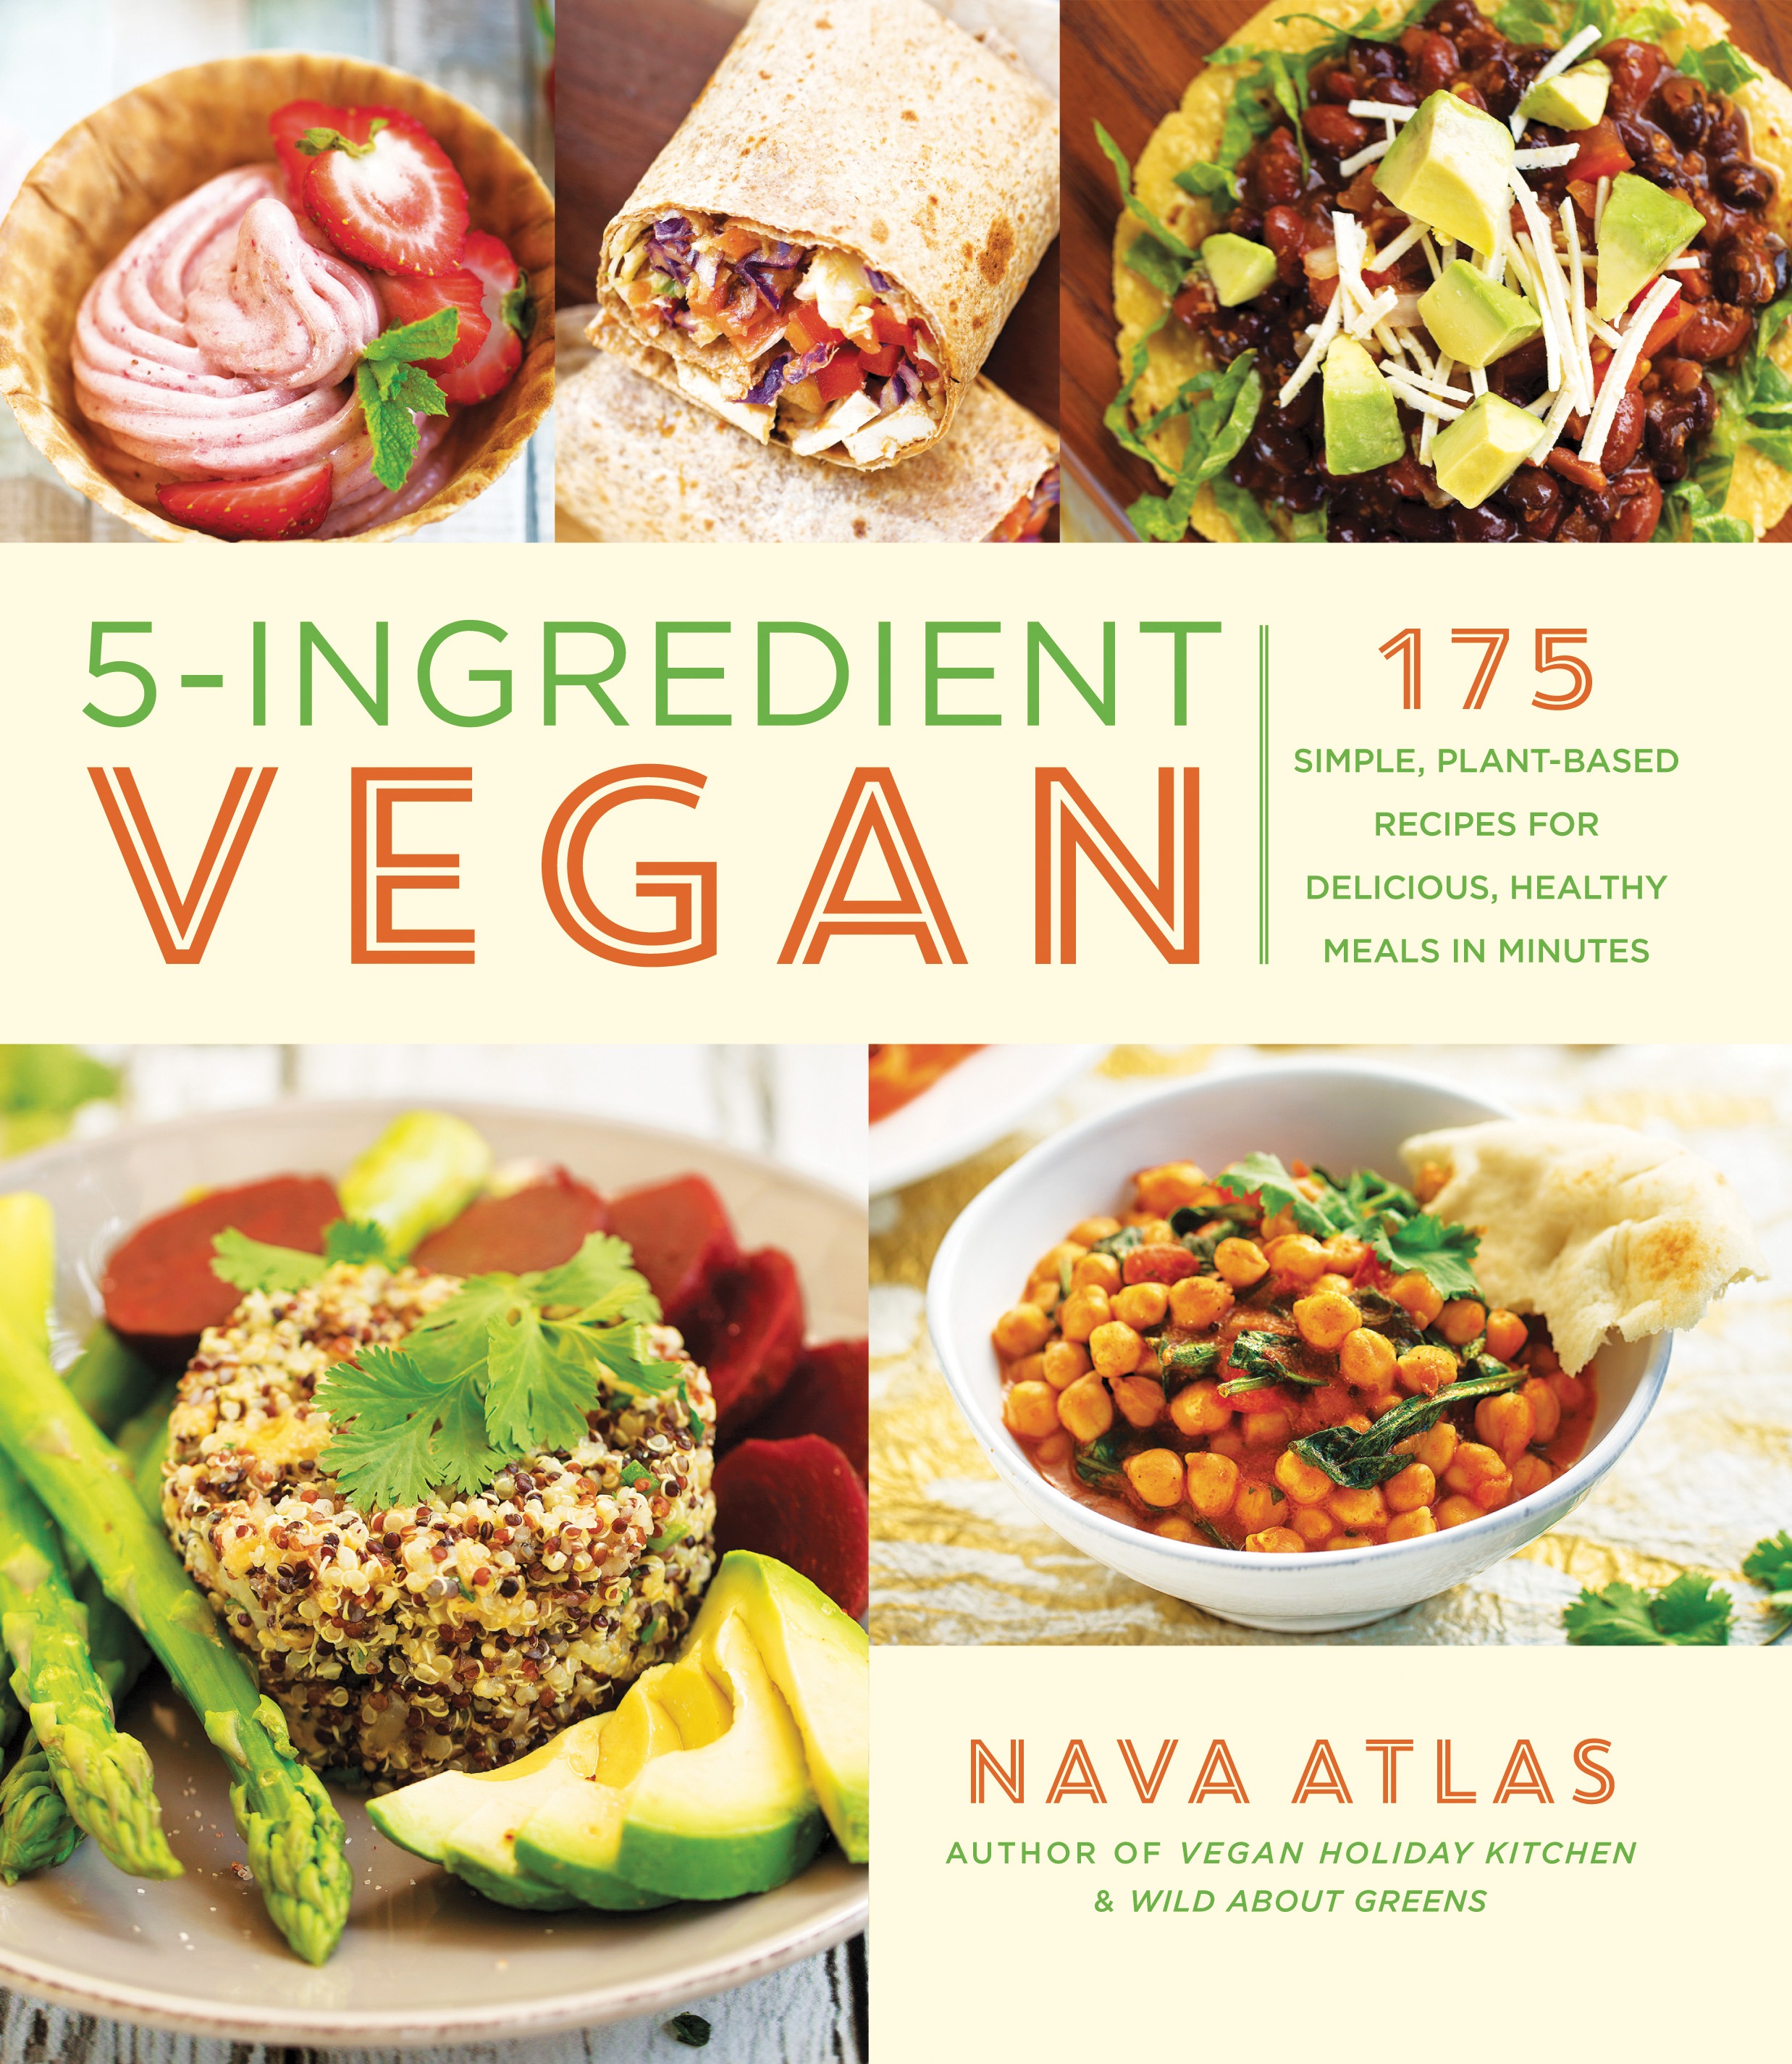 Cookbook cover for 5-INGREDIENT VEGAN: 175 Simple, Plant-Based Recipes for Delicious, Healthy Meals in Minutes